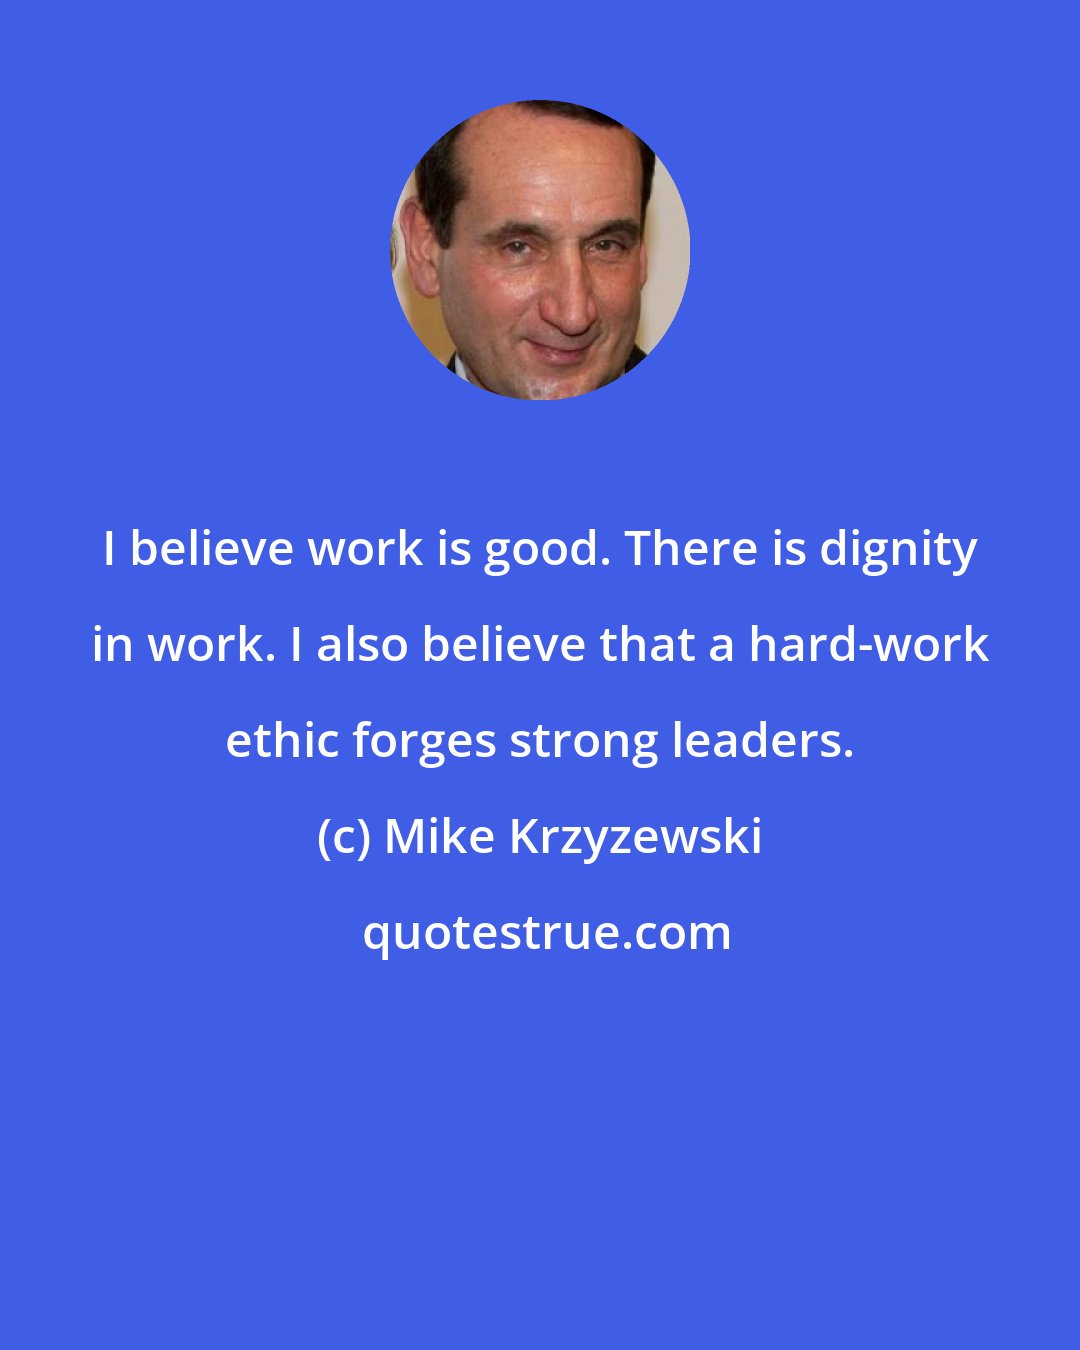 Mike Krzyzewski: I believe work is good. There is dignity in work. I also believe that a hard-work ethic forges strong leaders.